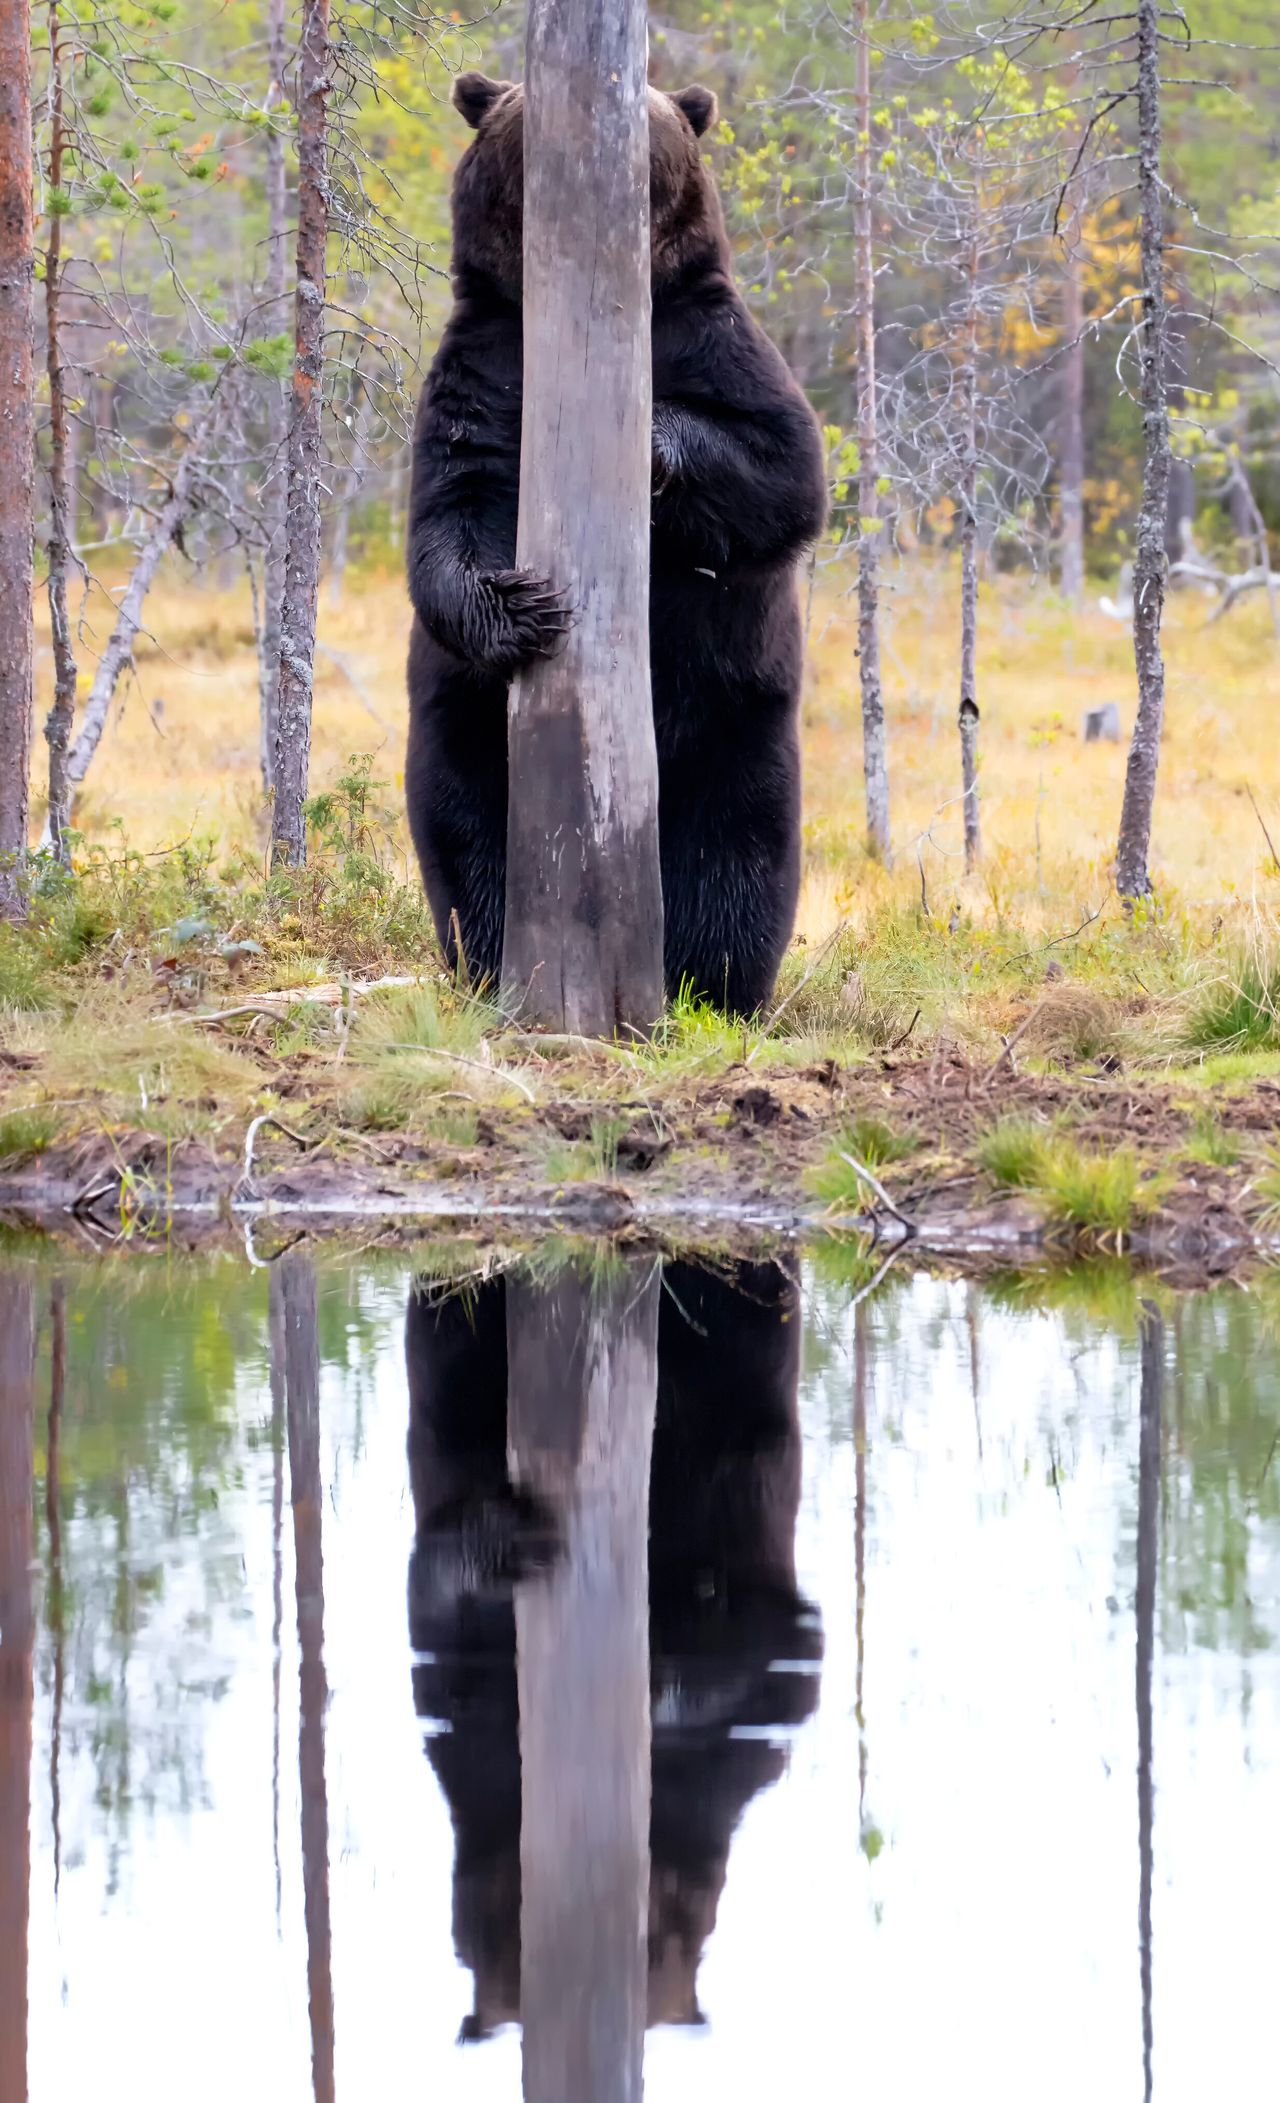 “Doggo” features a brown bear in Kuhmo, East Finland.